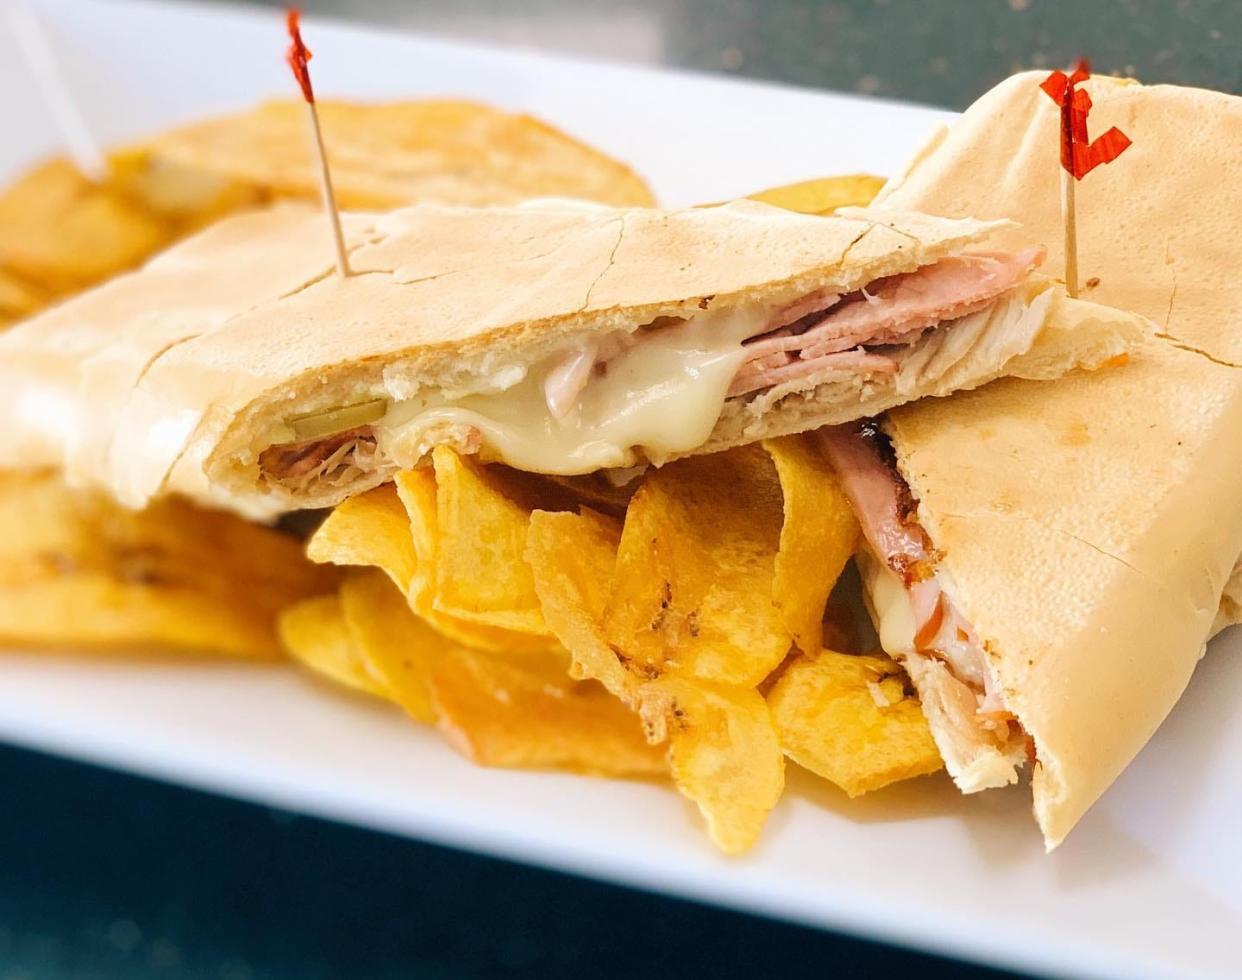 At Tropical Bakery in Palm Springs, the Cuban sandwiches are served on freshly baked and toasted Cuban bread.